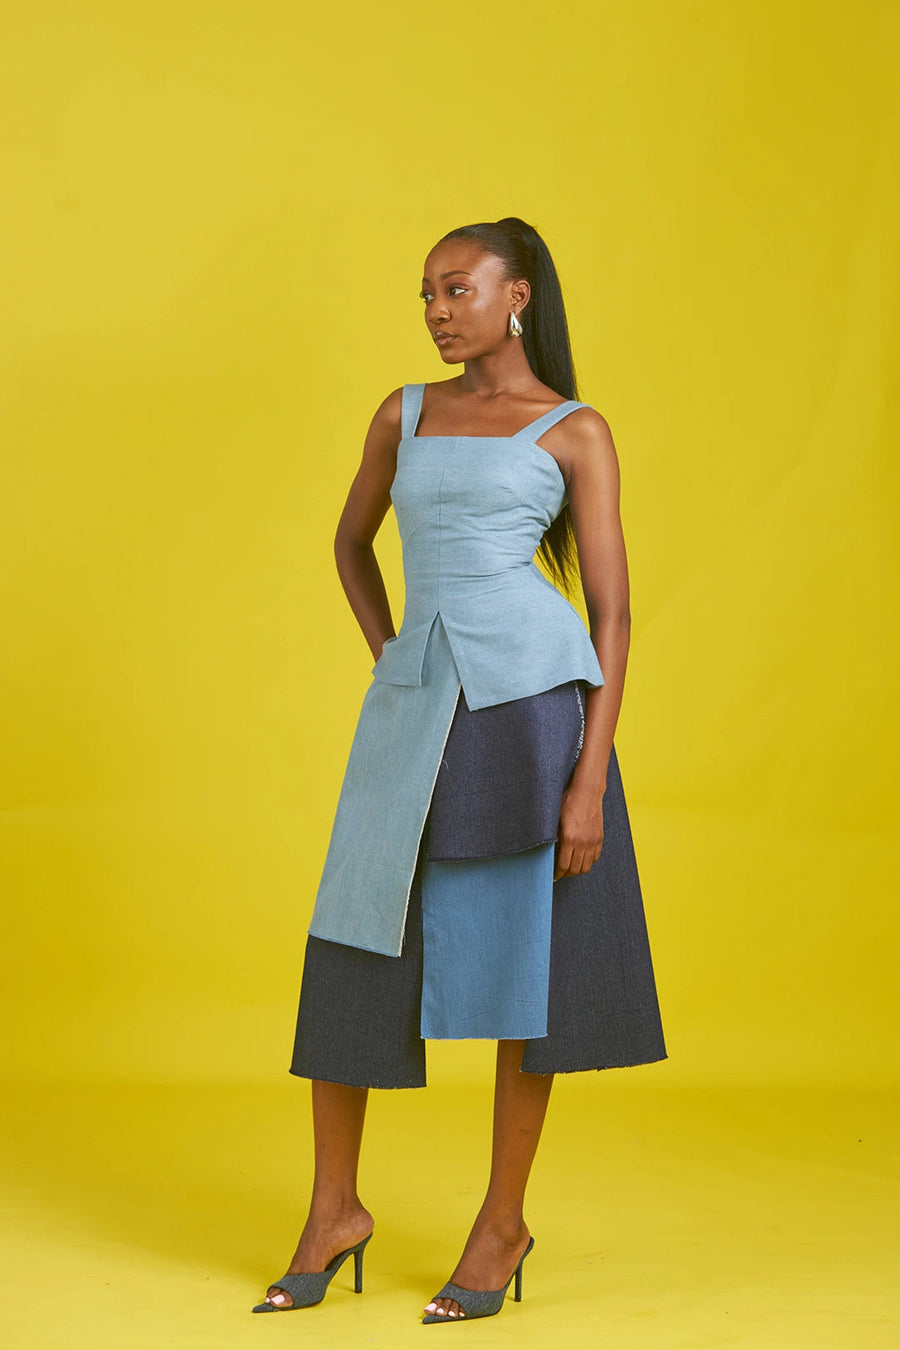 M.O.T Gola denim set, Fitted asymmetrical top with straps and Layered Aline skirt